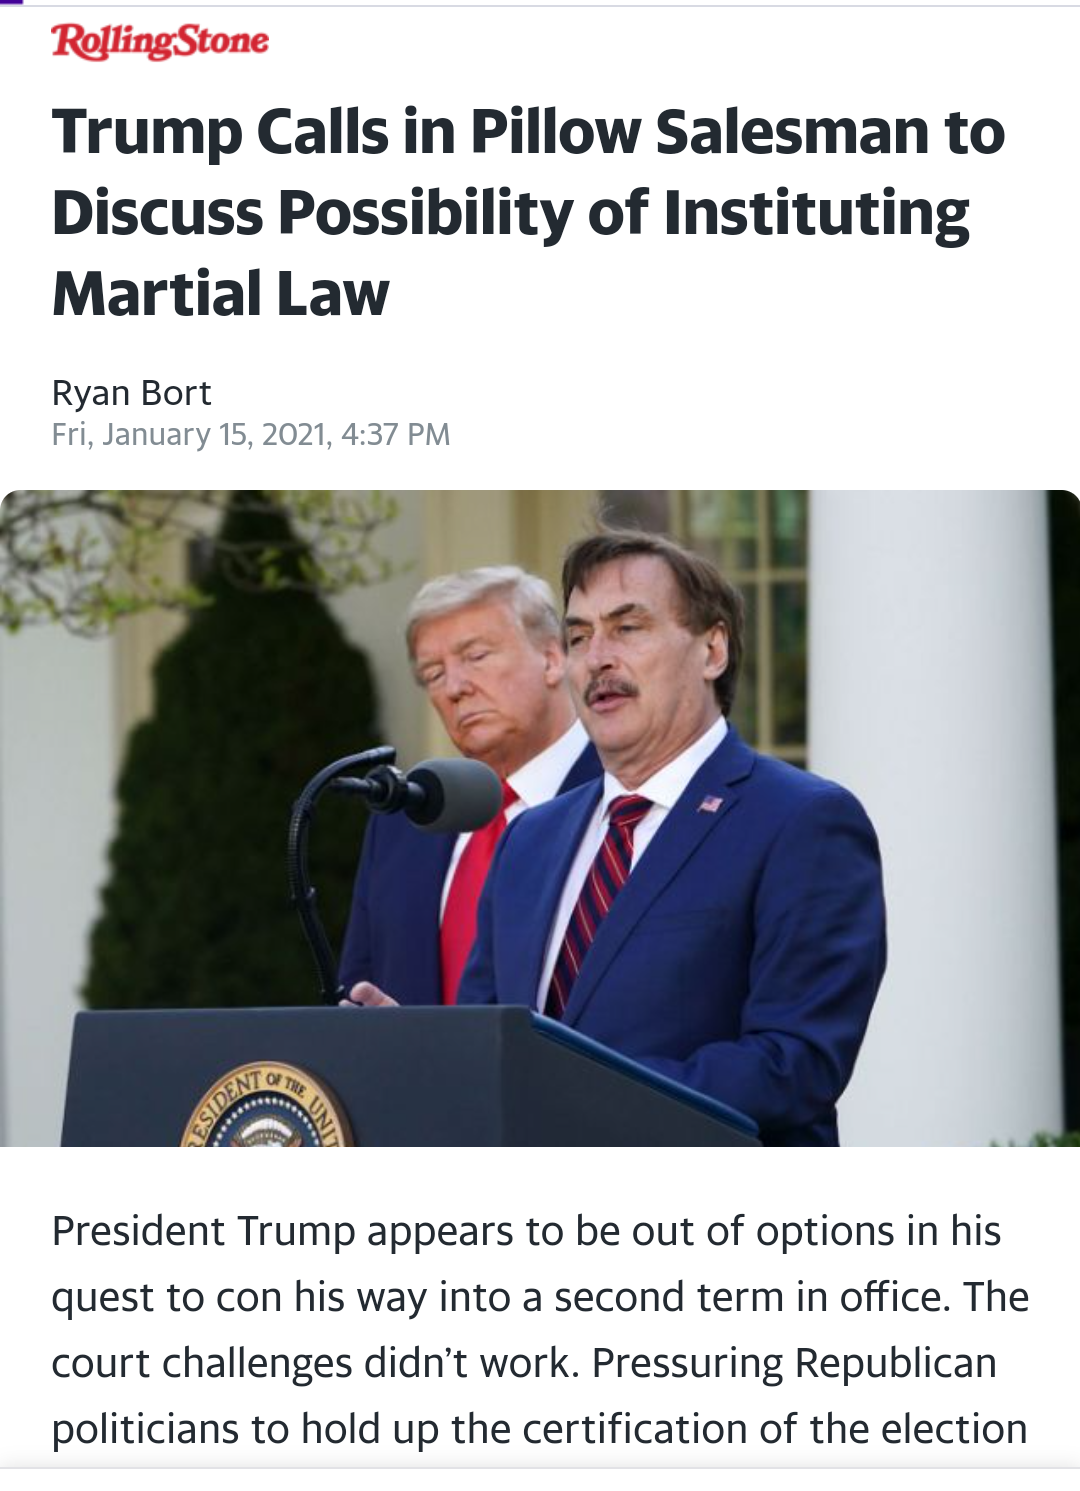 mike lindell ceo of my pillow inc - Rolling Stone Trump Calls in Pillow Salesman to Discuss Possibility of Instituting Martial Law Ryan Bort Fri, , See President Trump appears to be out of options in his quest to con his way into a second term in office. 